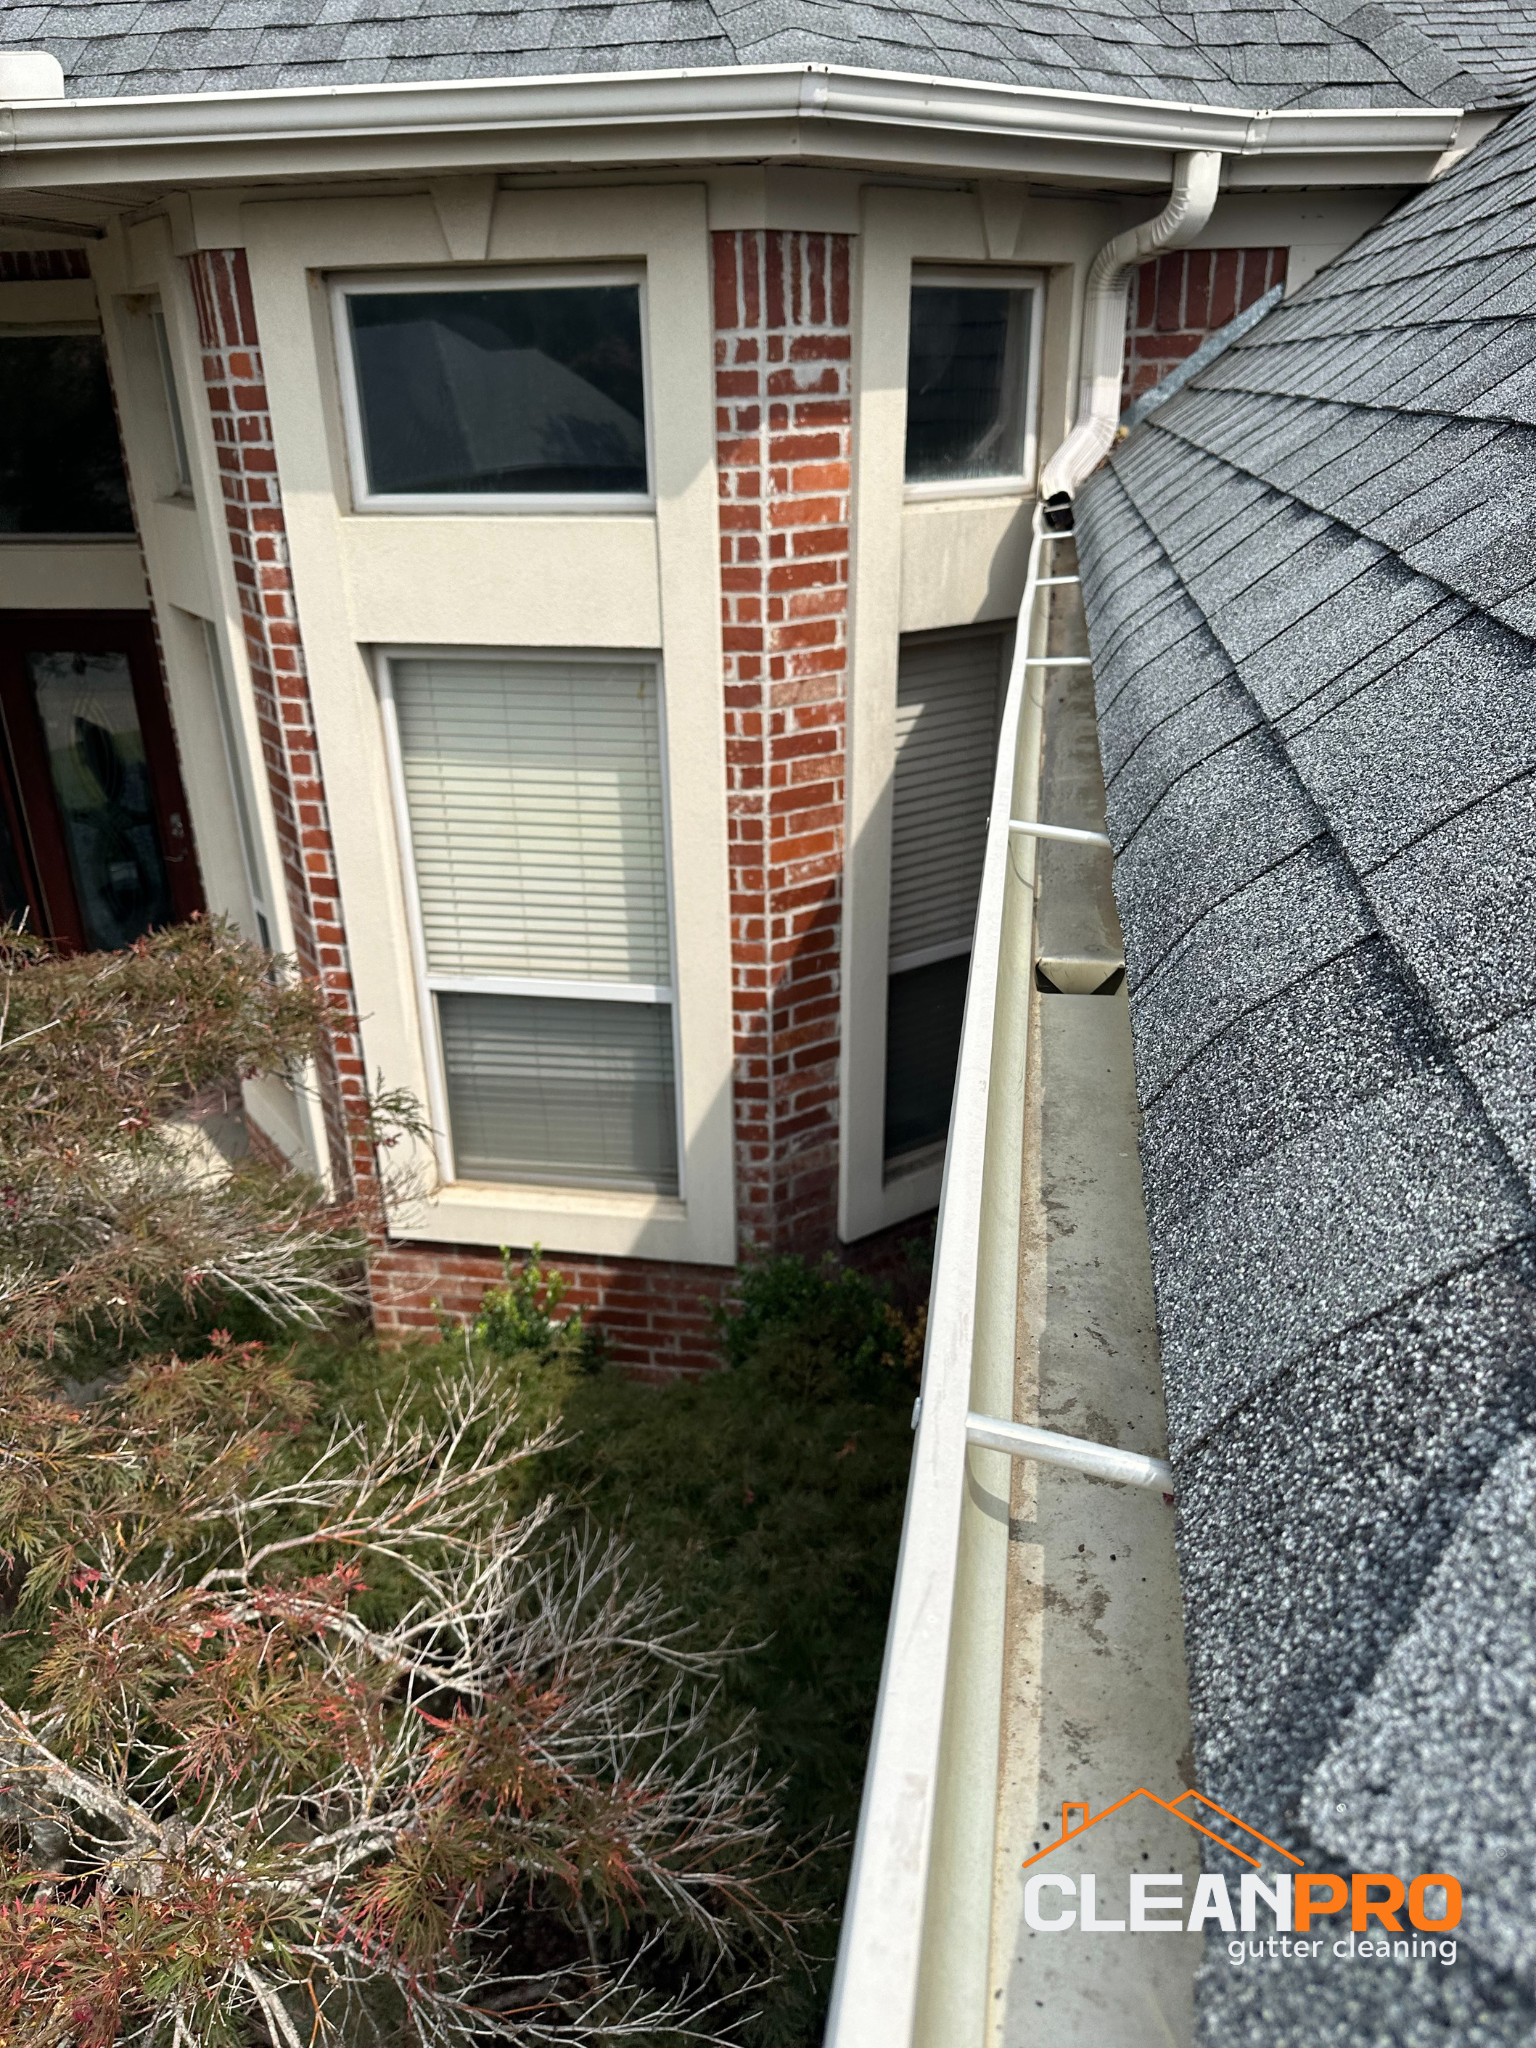 Quality Gutter Cleaning in San Diego CA